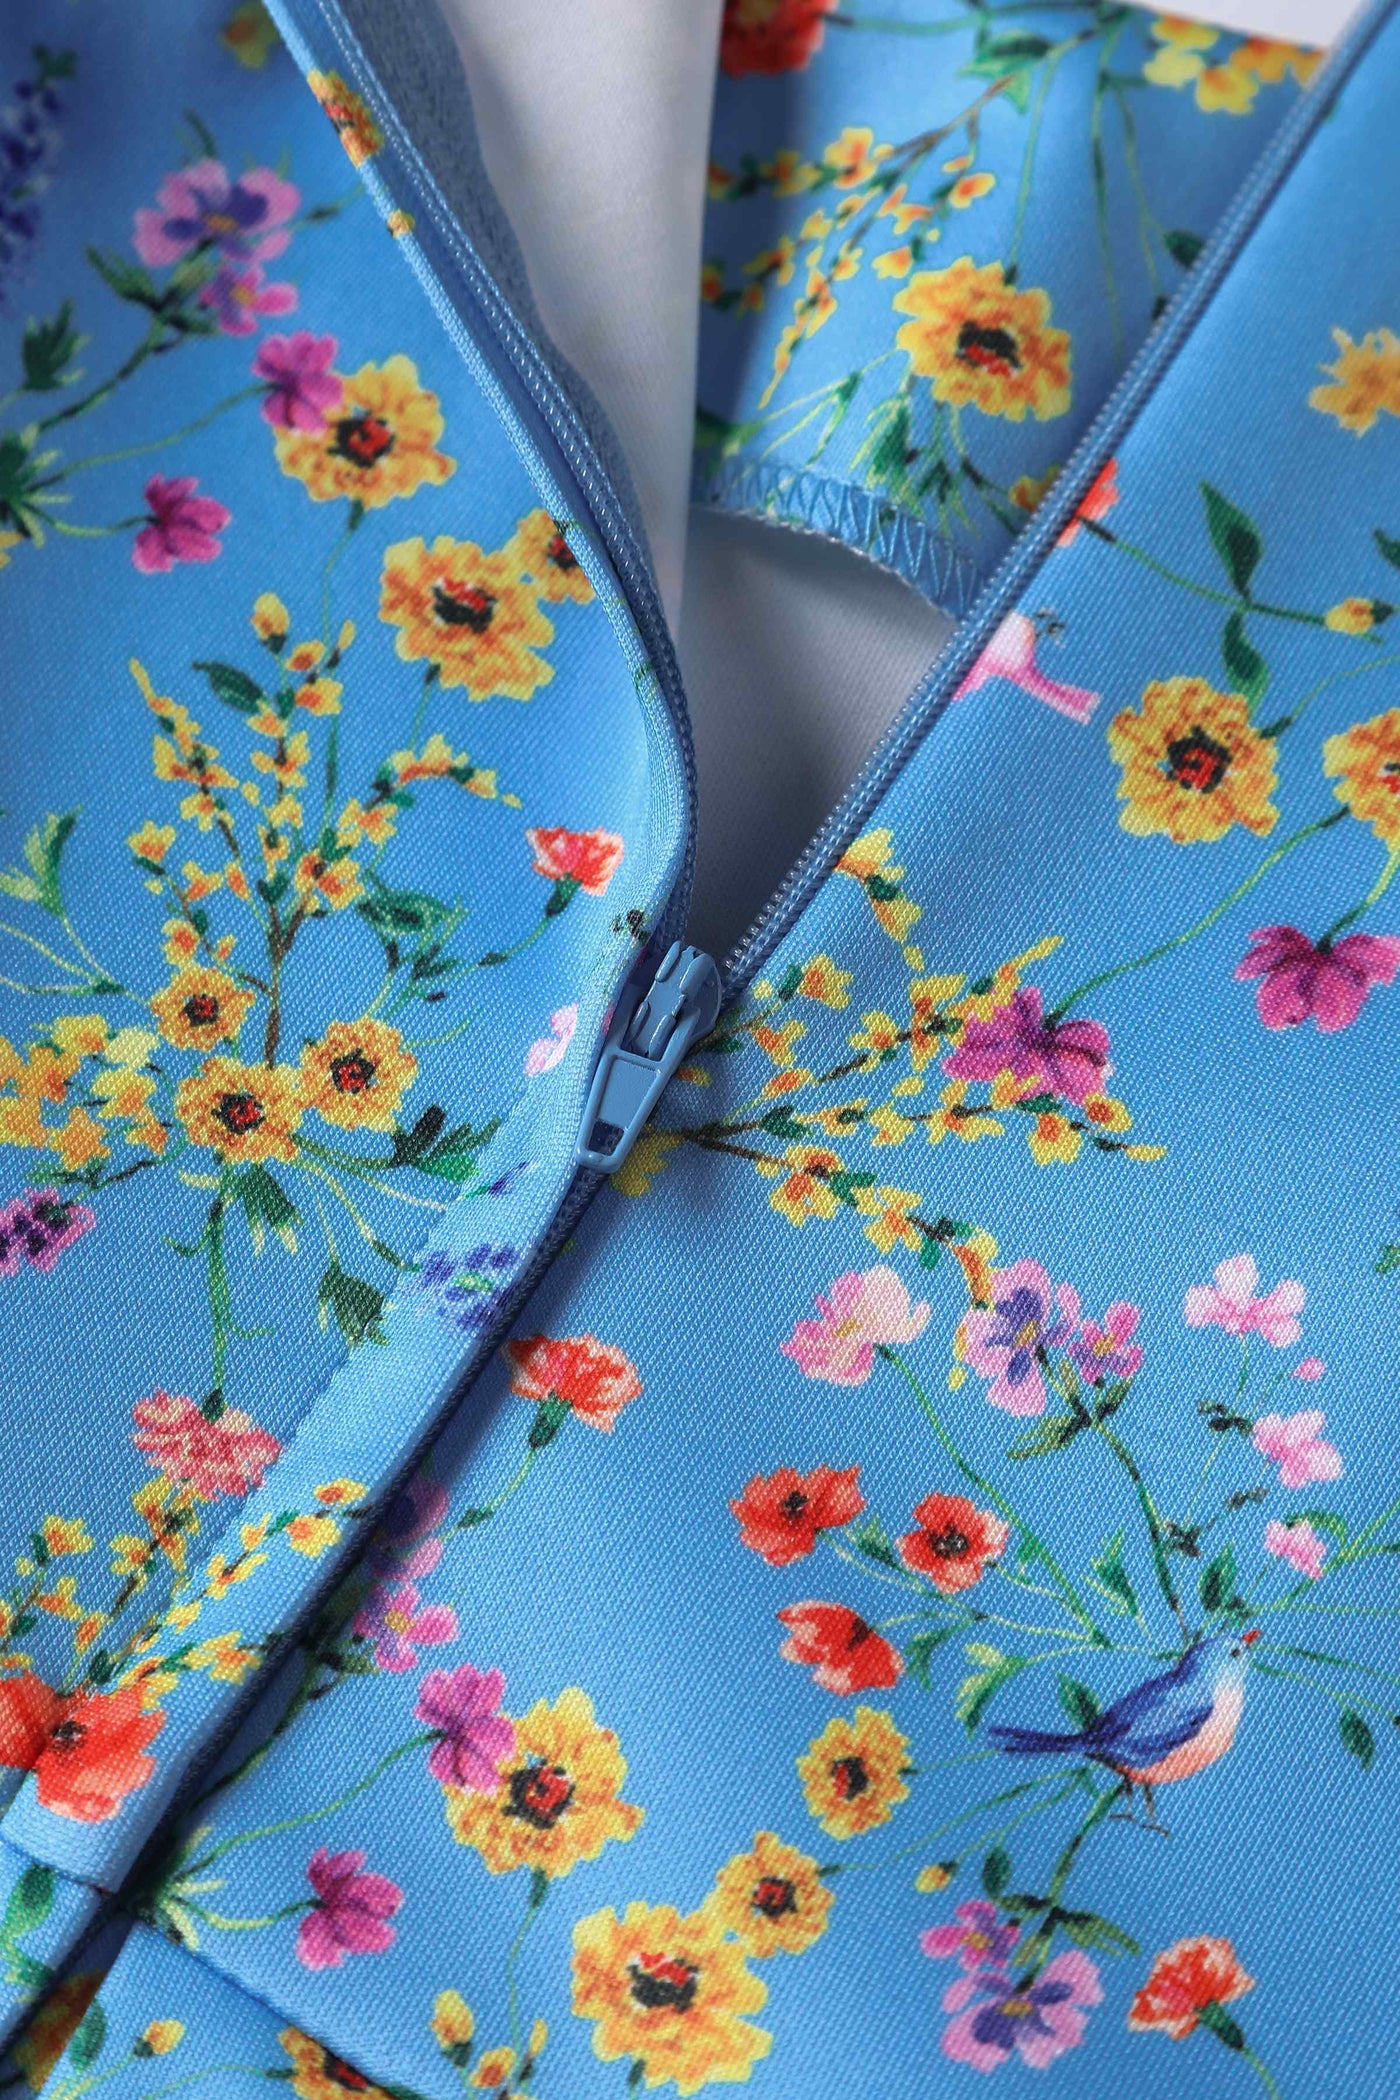 Close up View of Floral Flared Dress in Blue